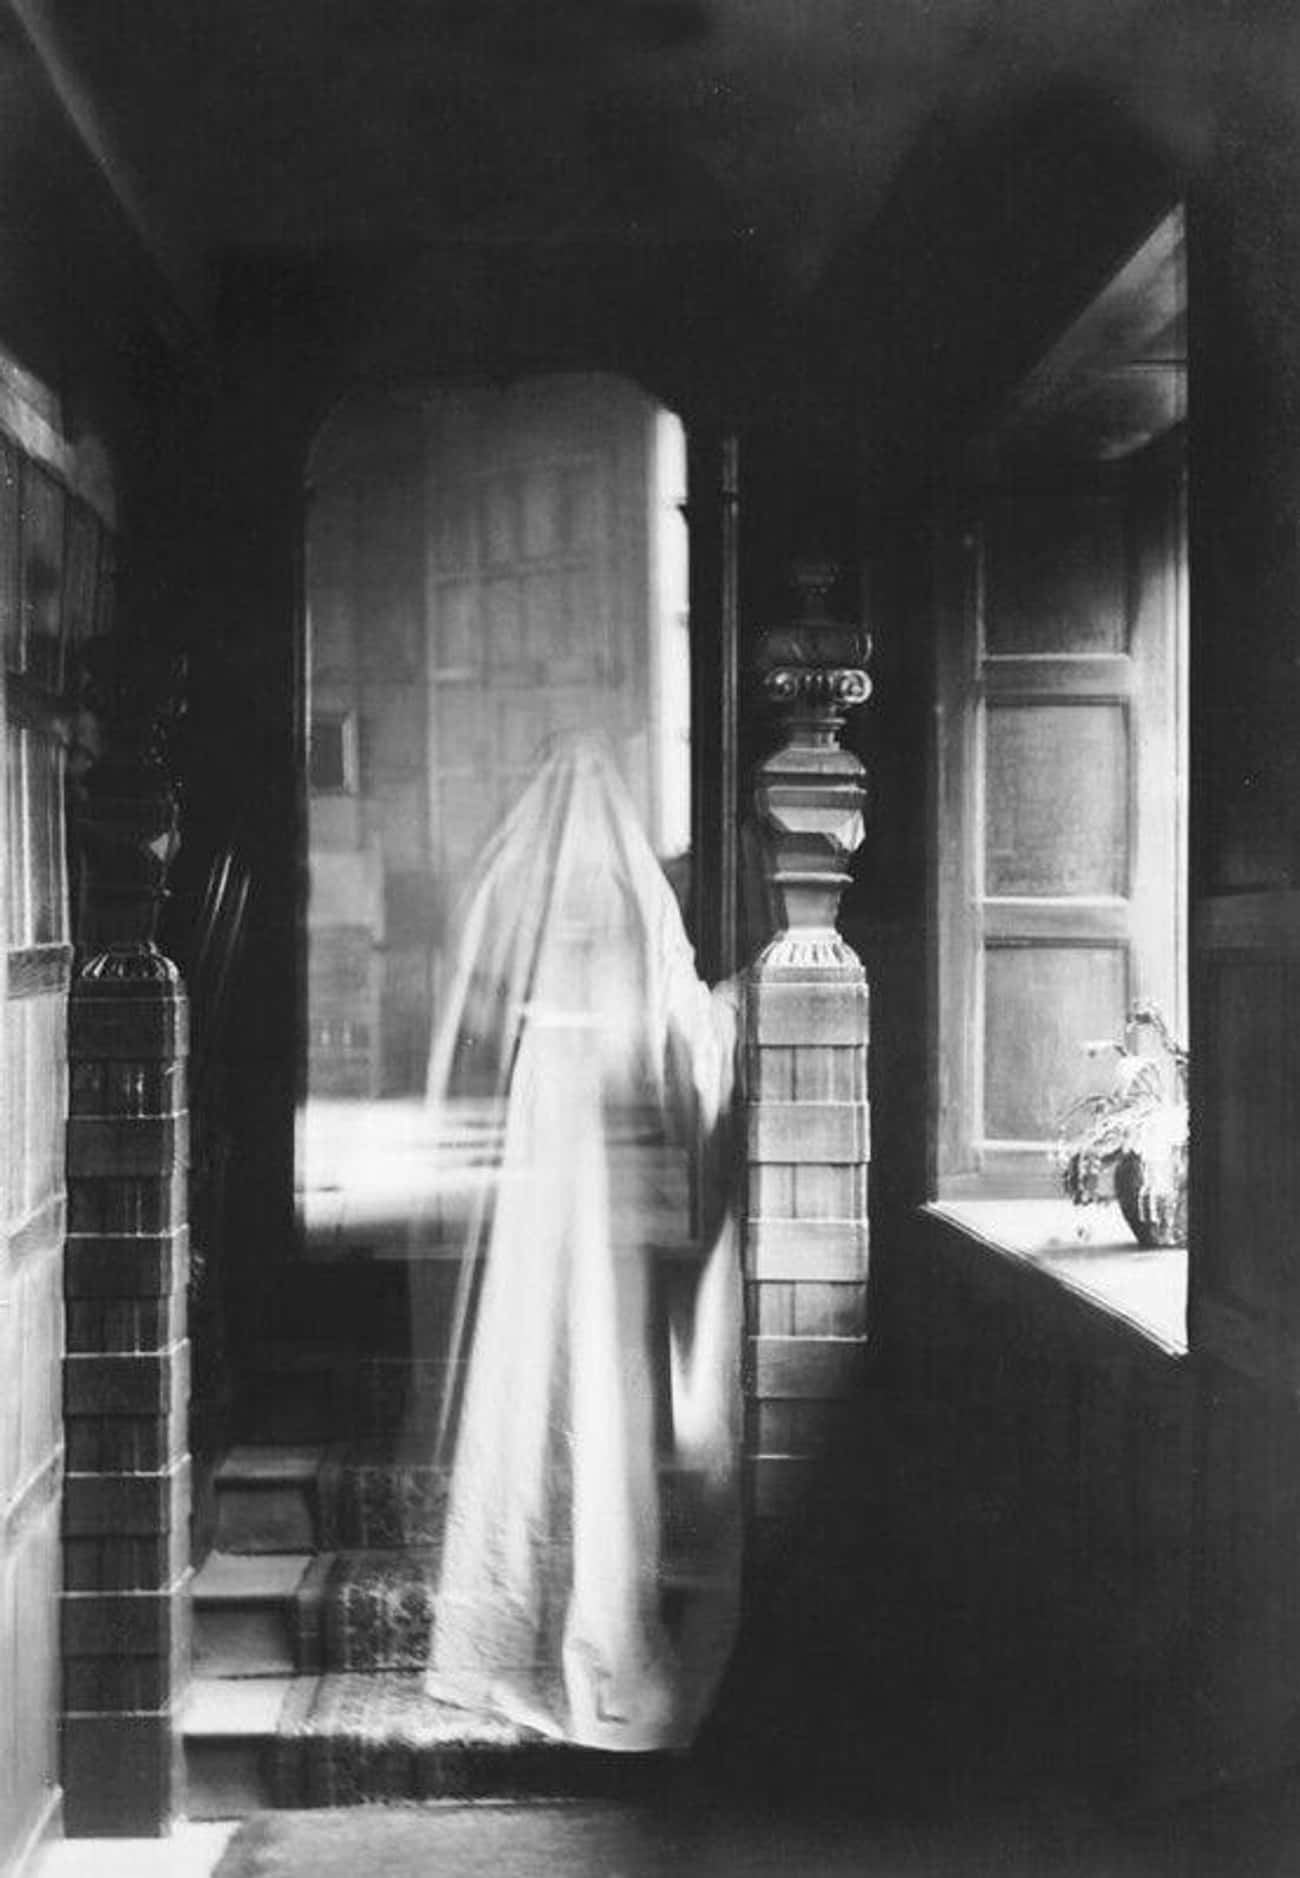 Poltergeist Are Invisible, While Ghosts Make Rare Appearances On Occassion